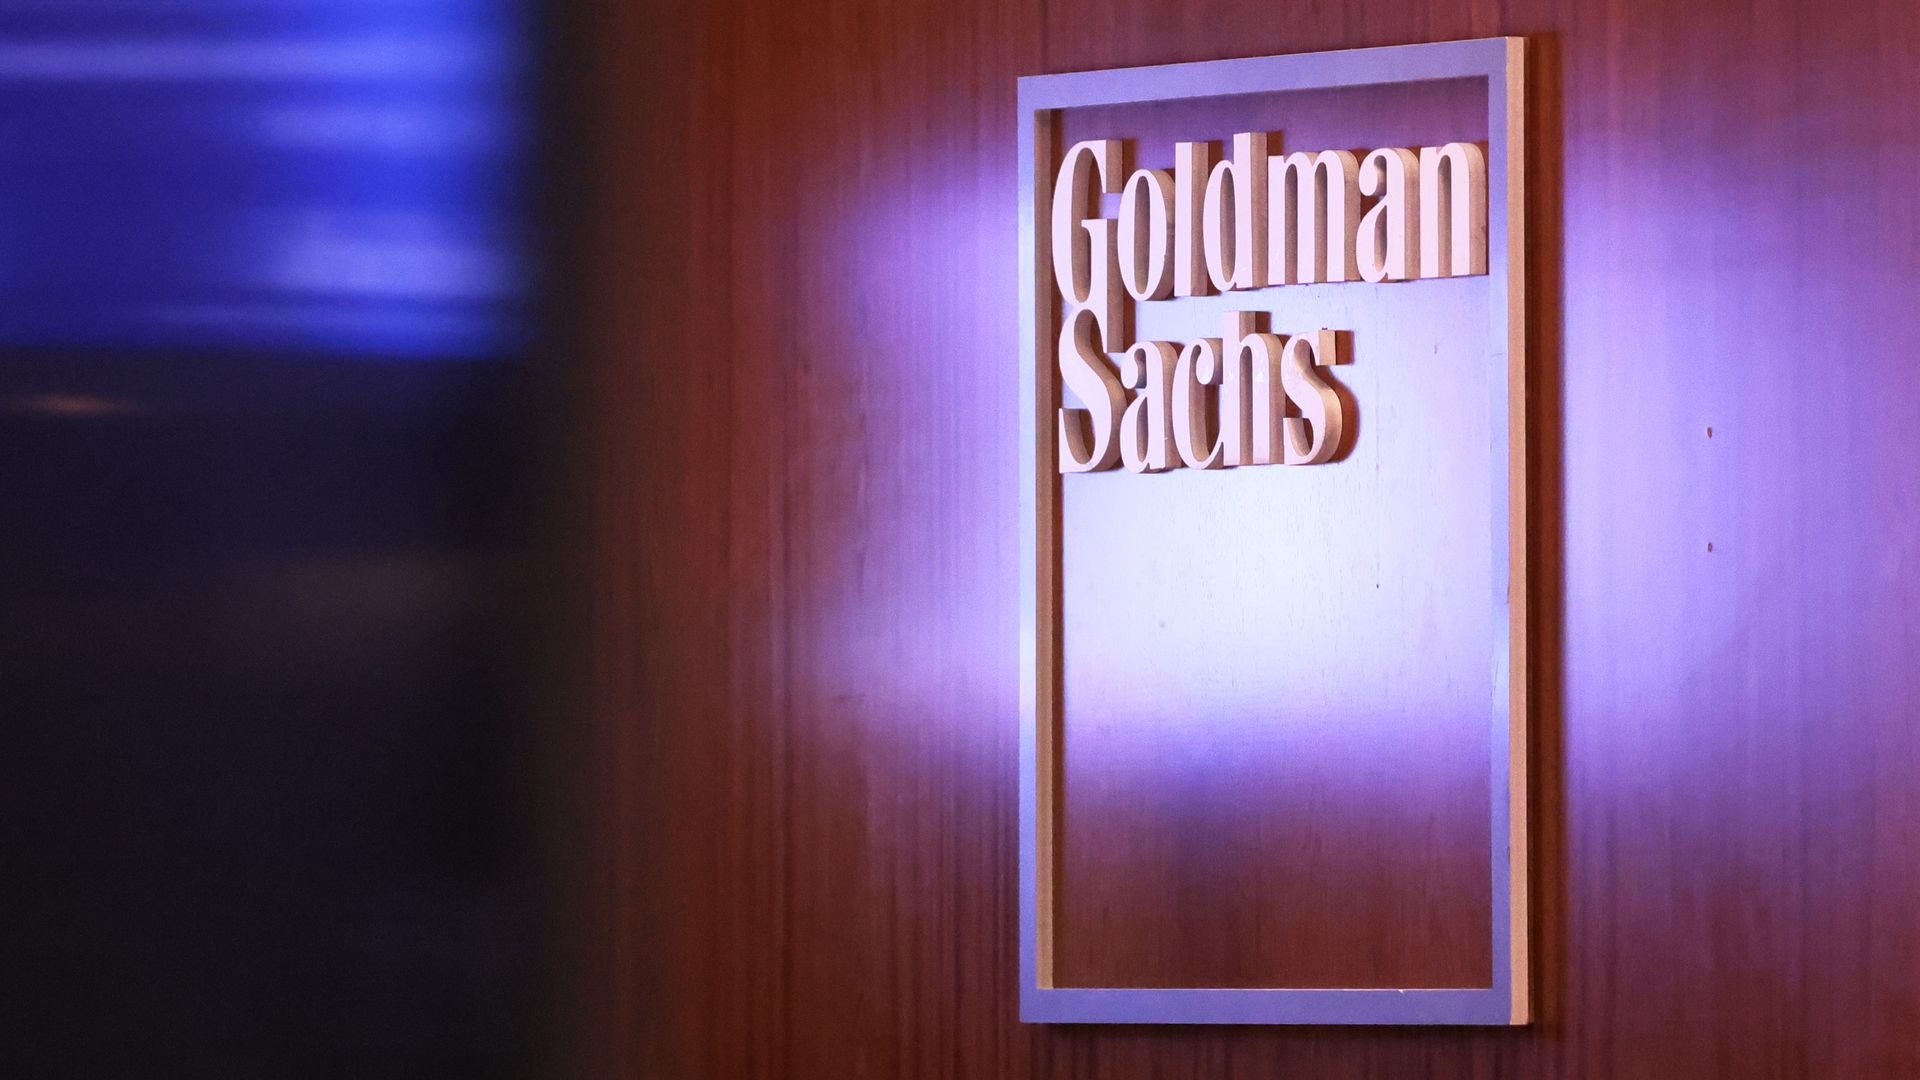 Goldman Sachs layoffs planned: Thousands of workers to lose jobs